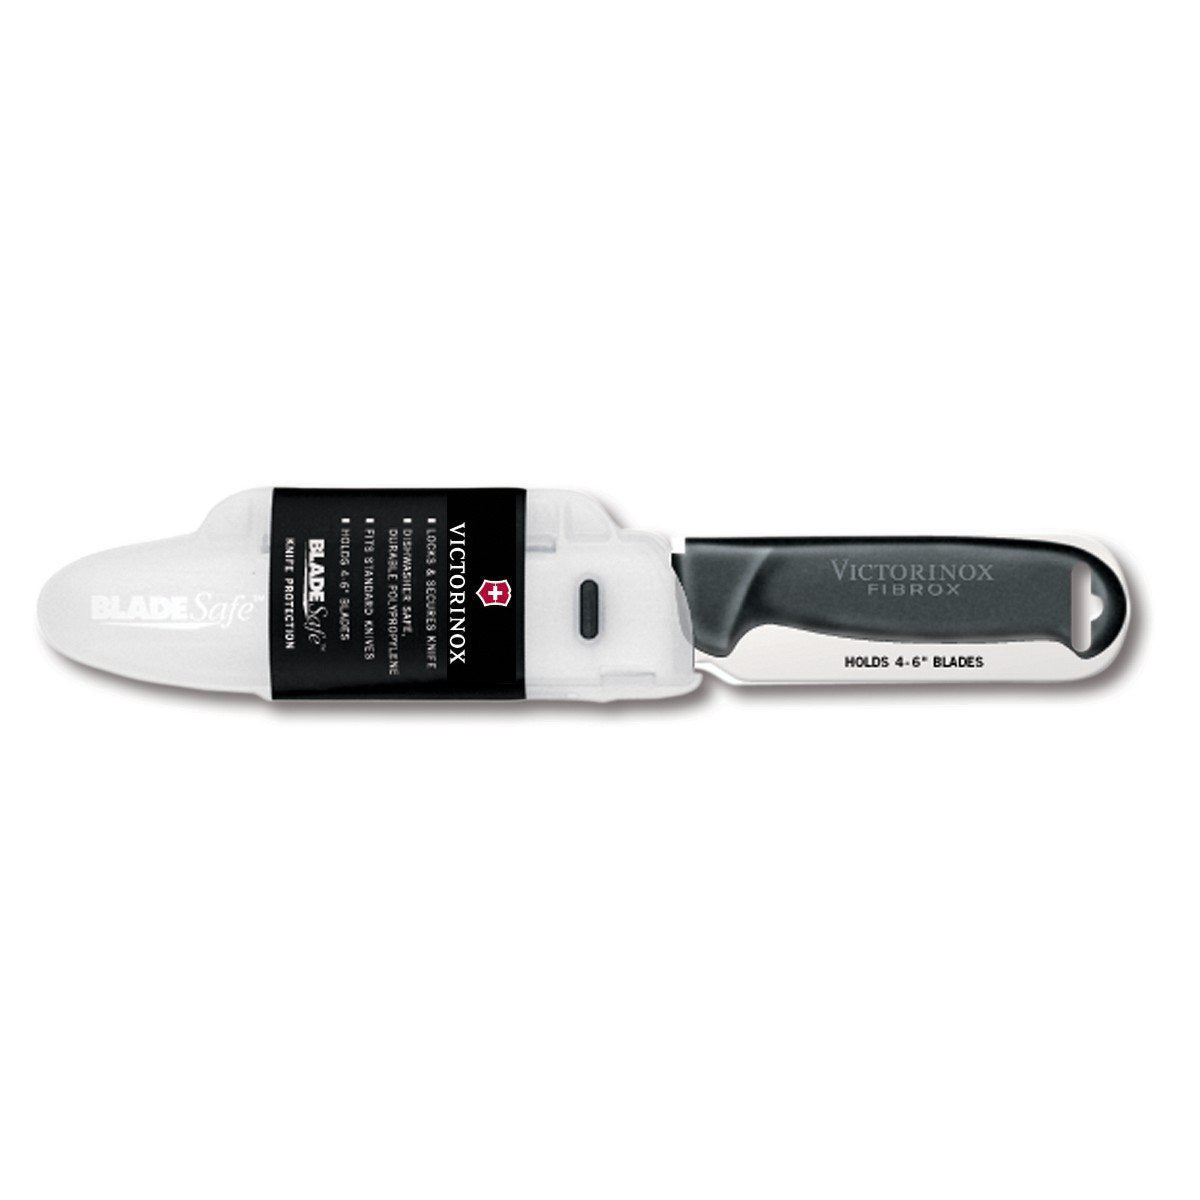 Victorinox Knife Sharpener - V Type With Guard